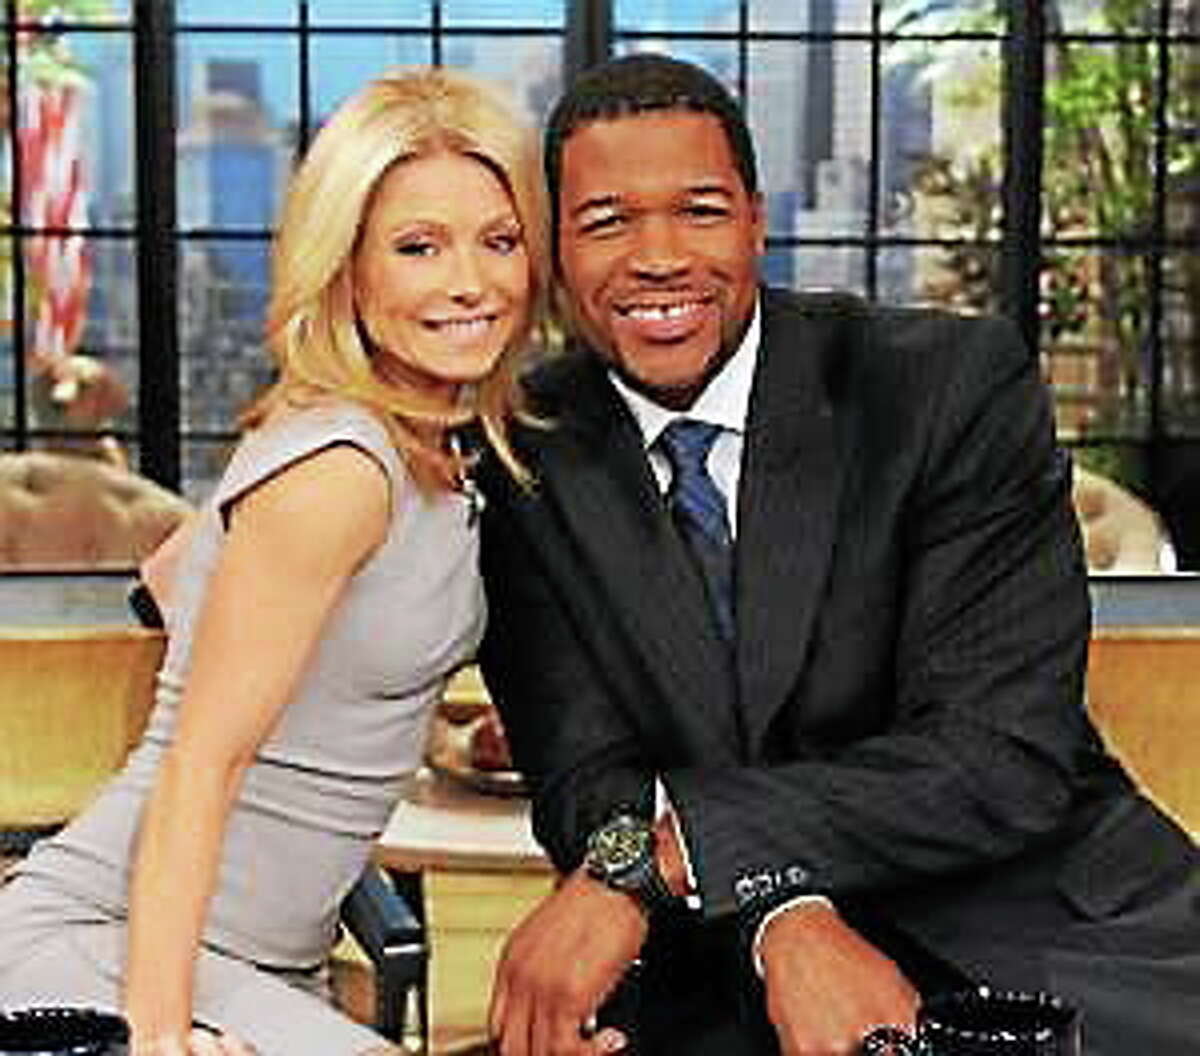 This Feb. 8, 2012, photo shows former football player Michael Strahan, right, and host Kelly Ripa during Strahan’s guest-host appearance on “Live! with Kelly, “ in New York.